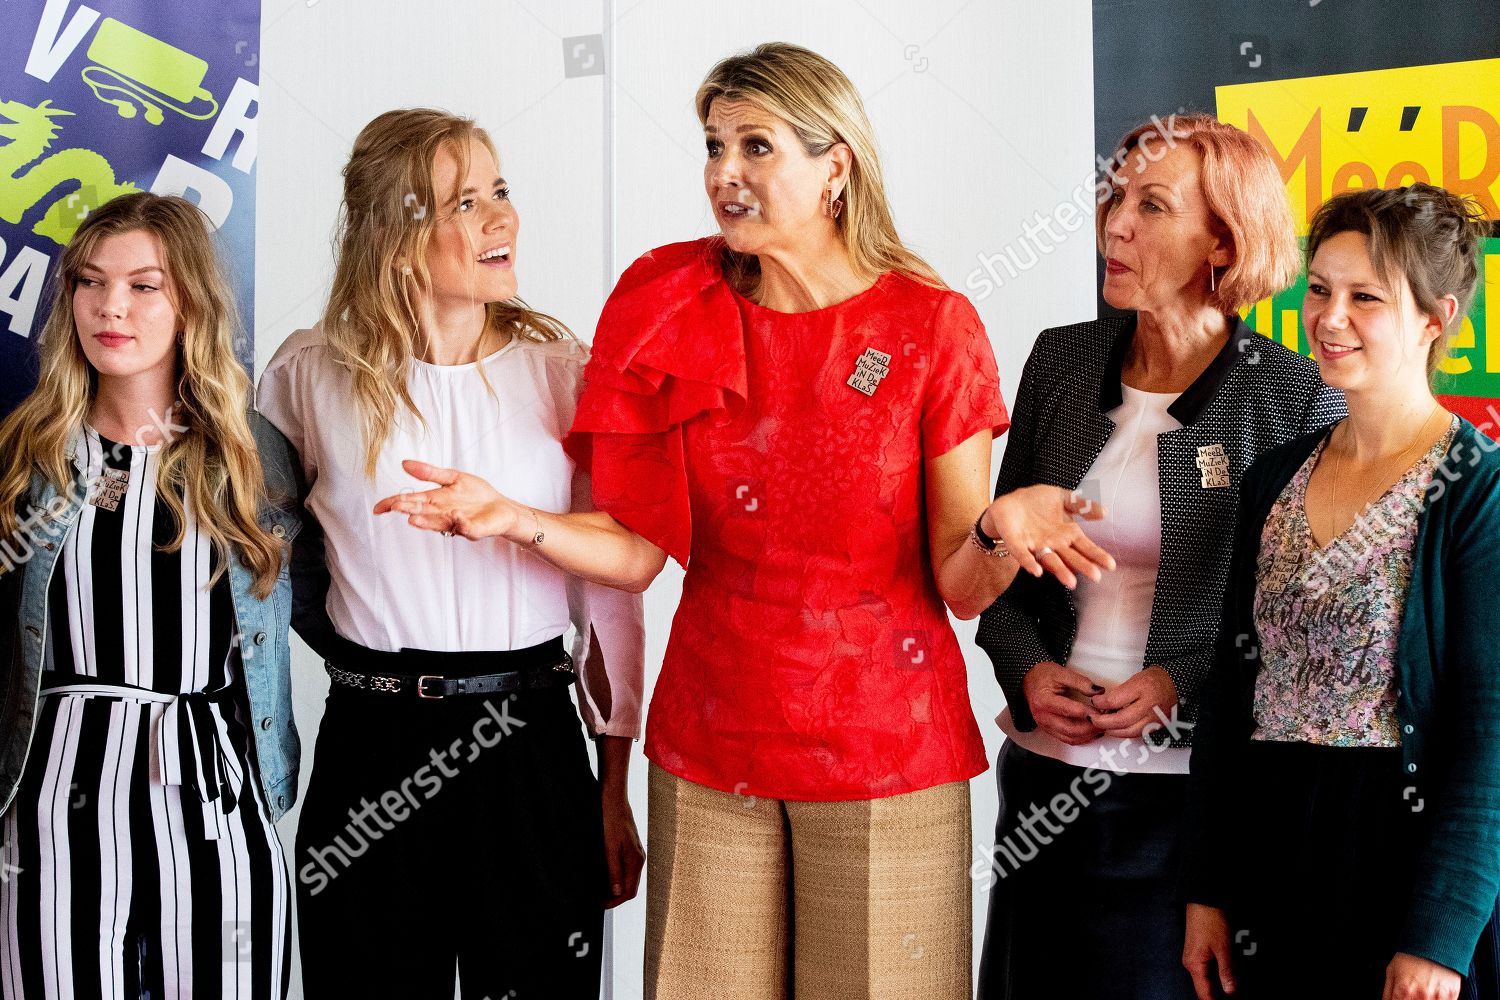 queen-maxima-signing-the-more-music-covenant-in-the-classroom-drenthe-the-netherlands-shutterstock-editorial-10317726aa.jpg